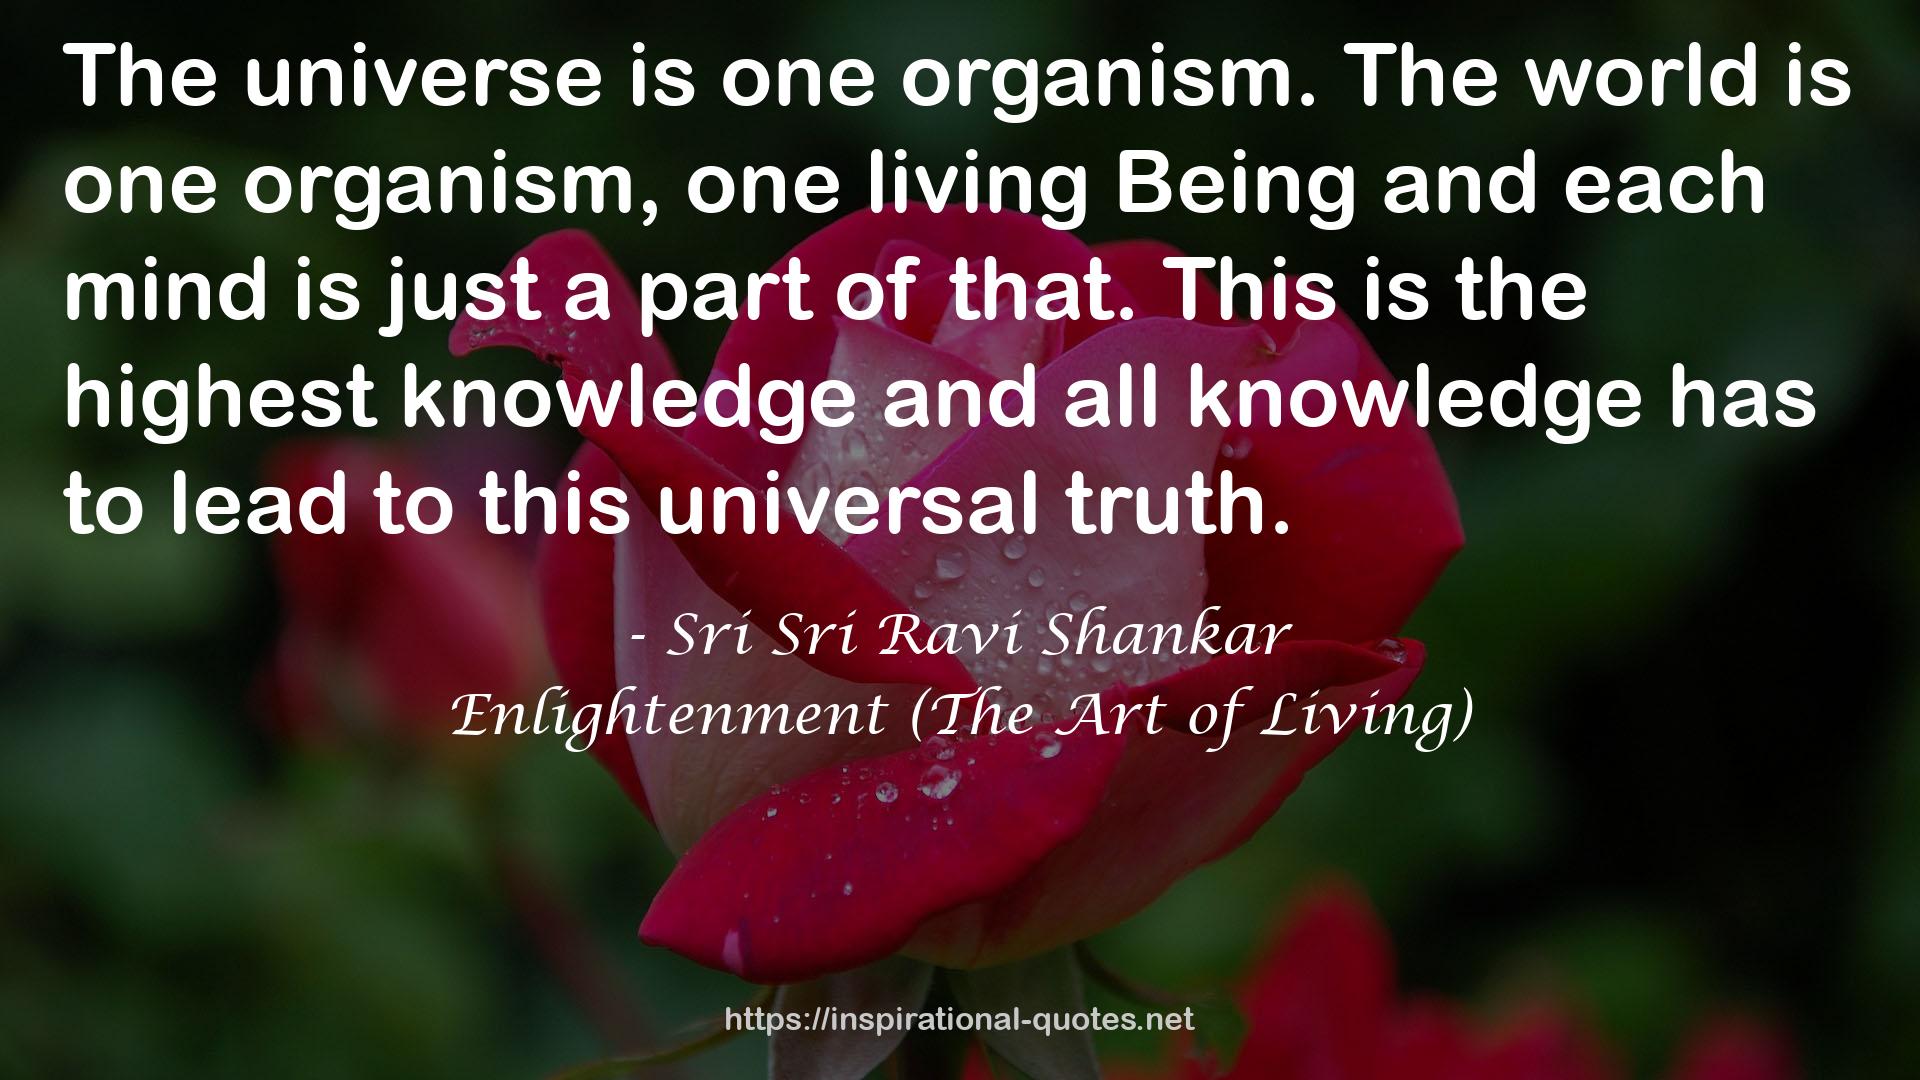 Enlightenment (The Art of Living) QUOTES